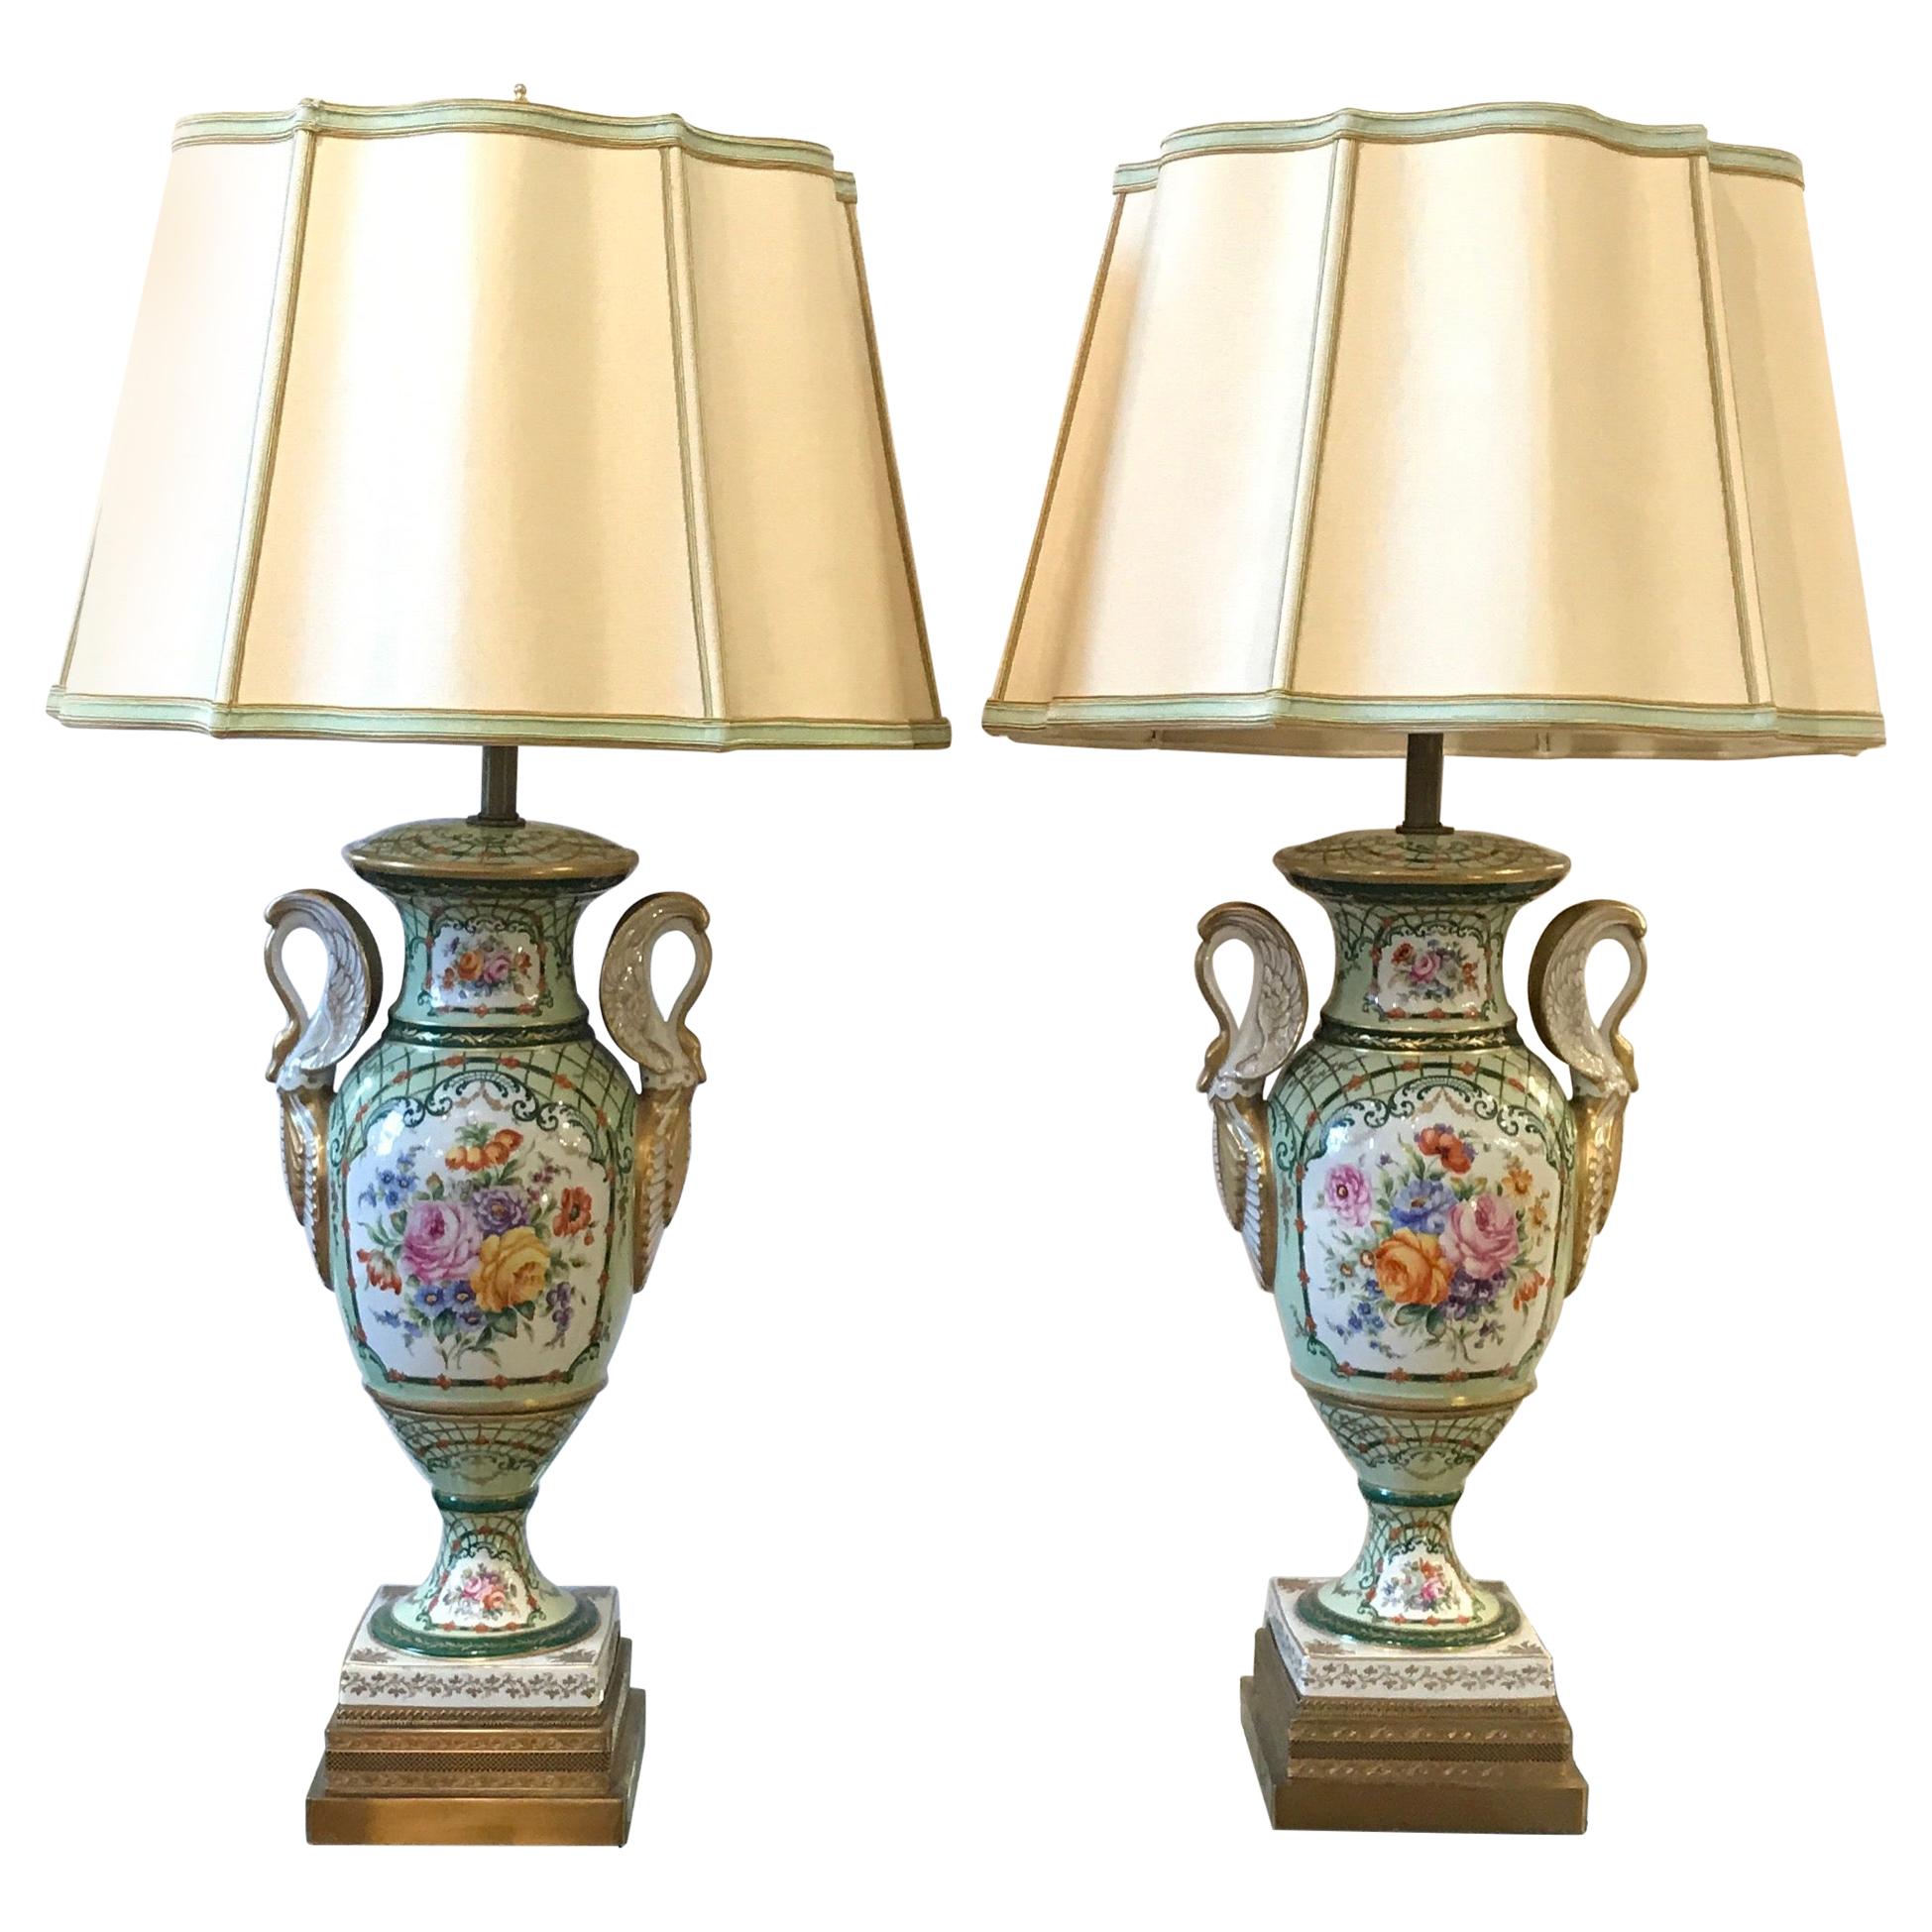 Elegant Pair of French Hand Painted Porcelain Lamps